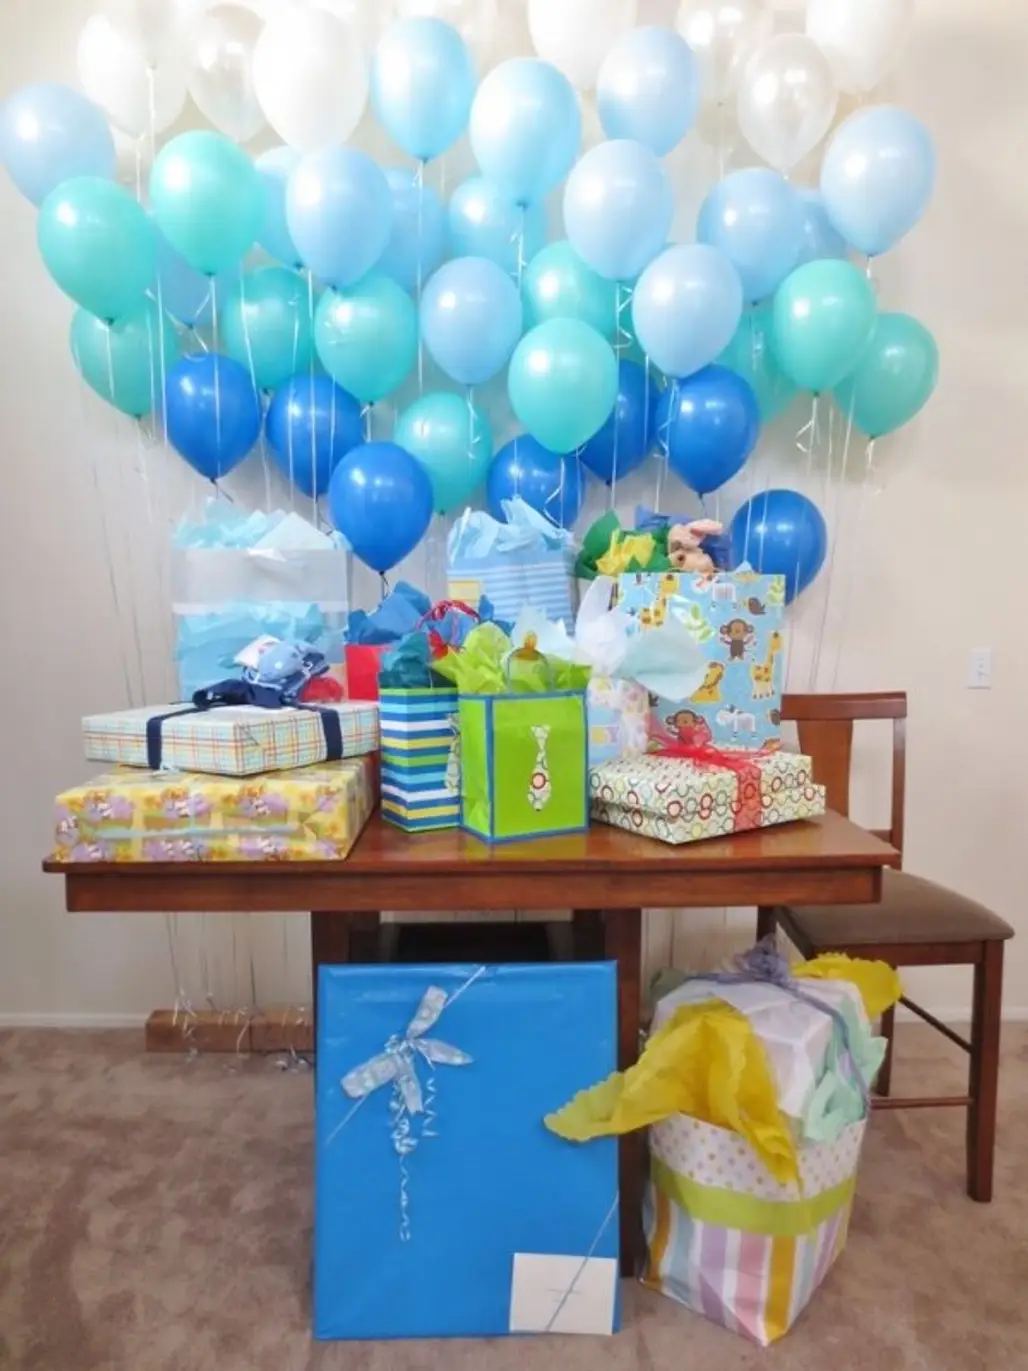 27 Super Cute Baby Shower Decorations to Make Your Party the Best ...